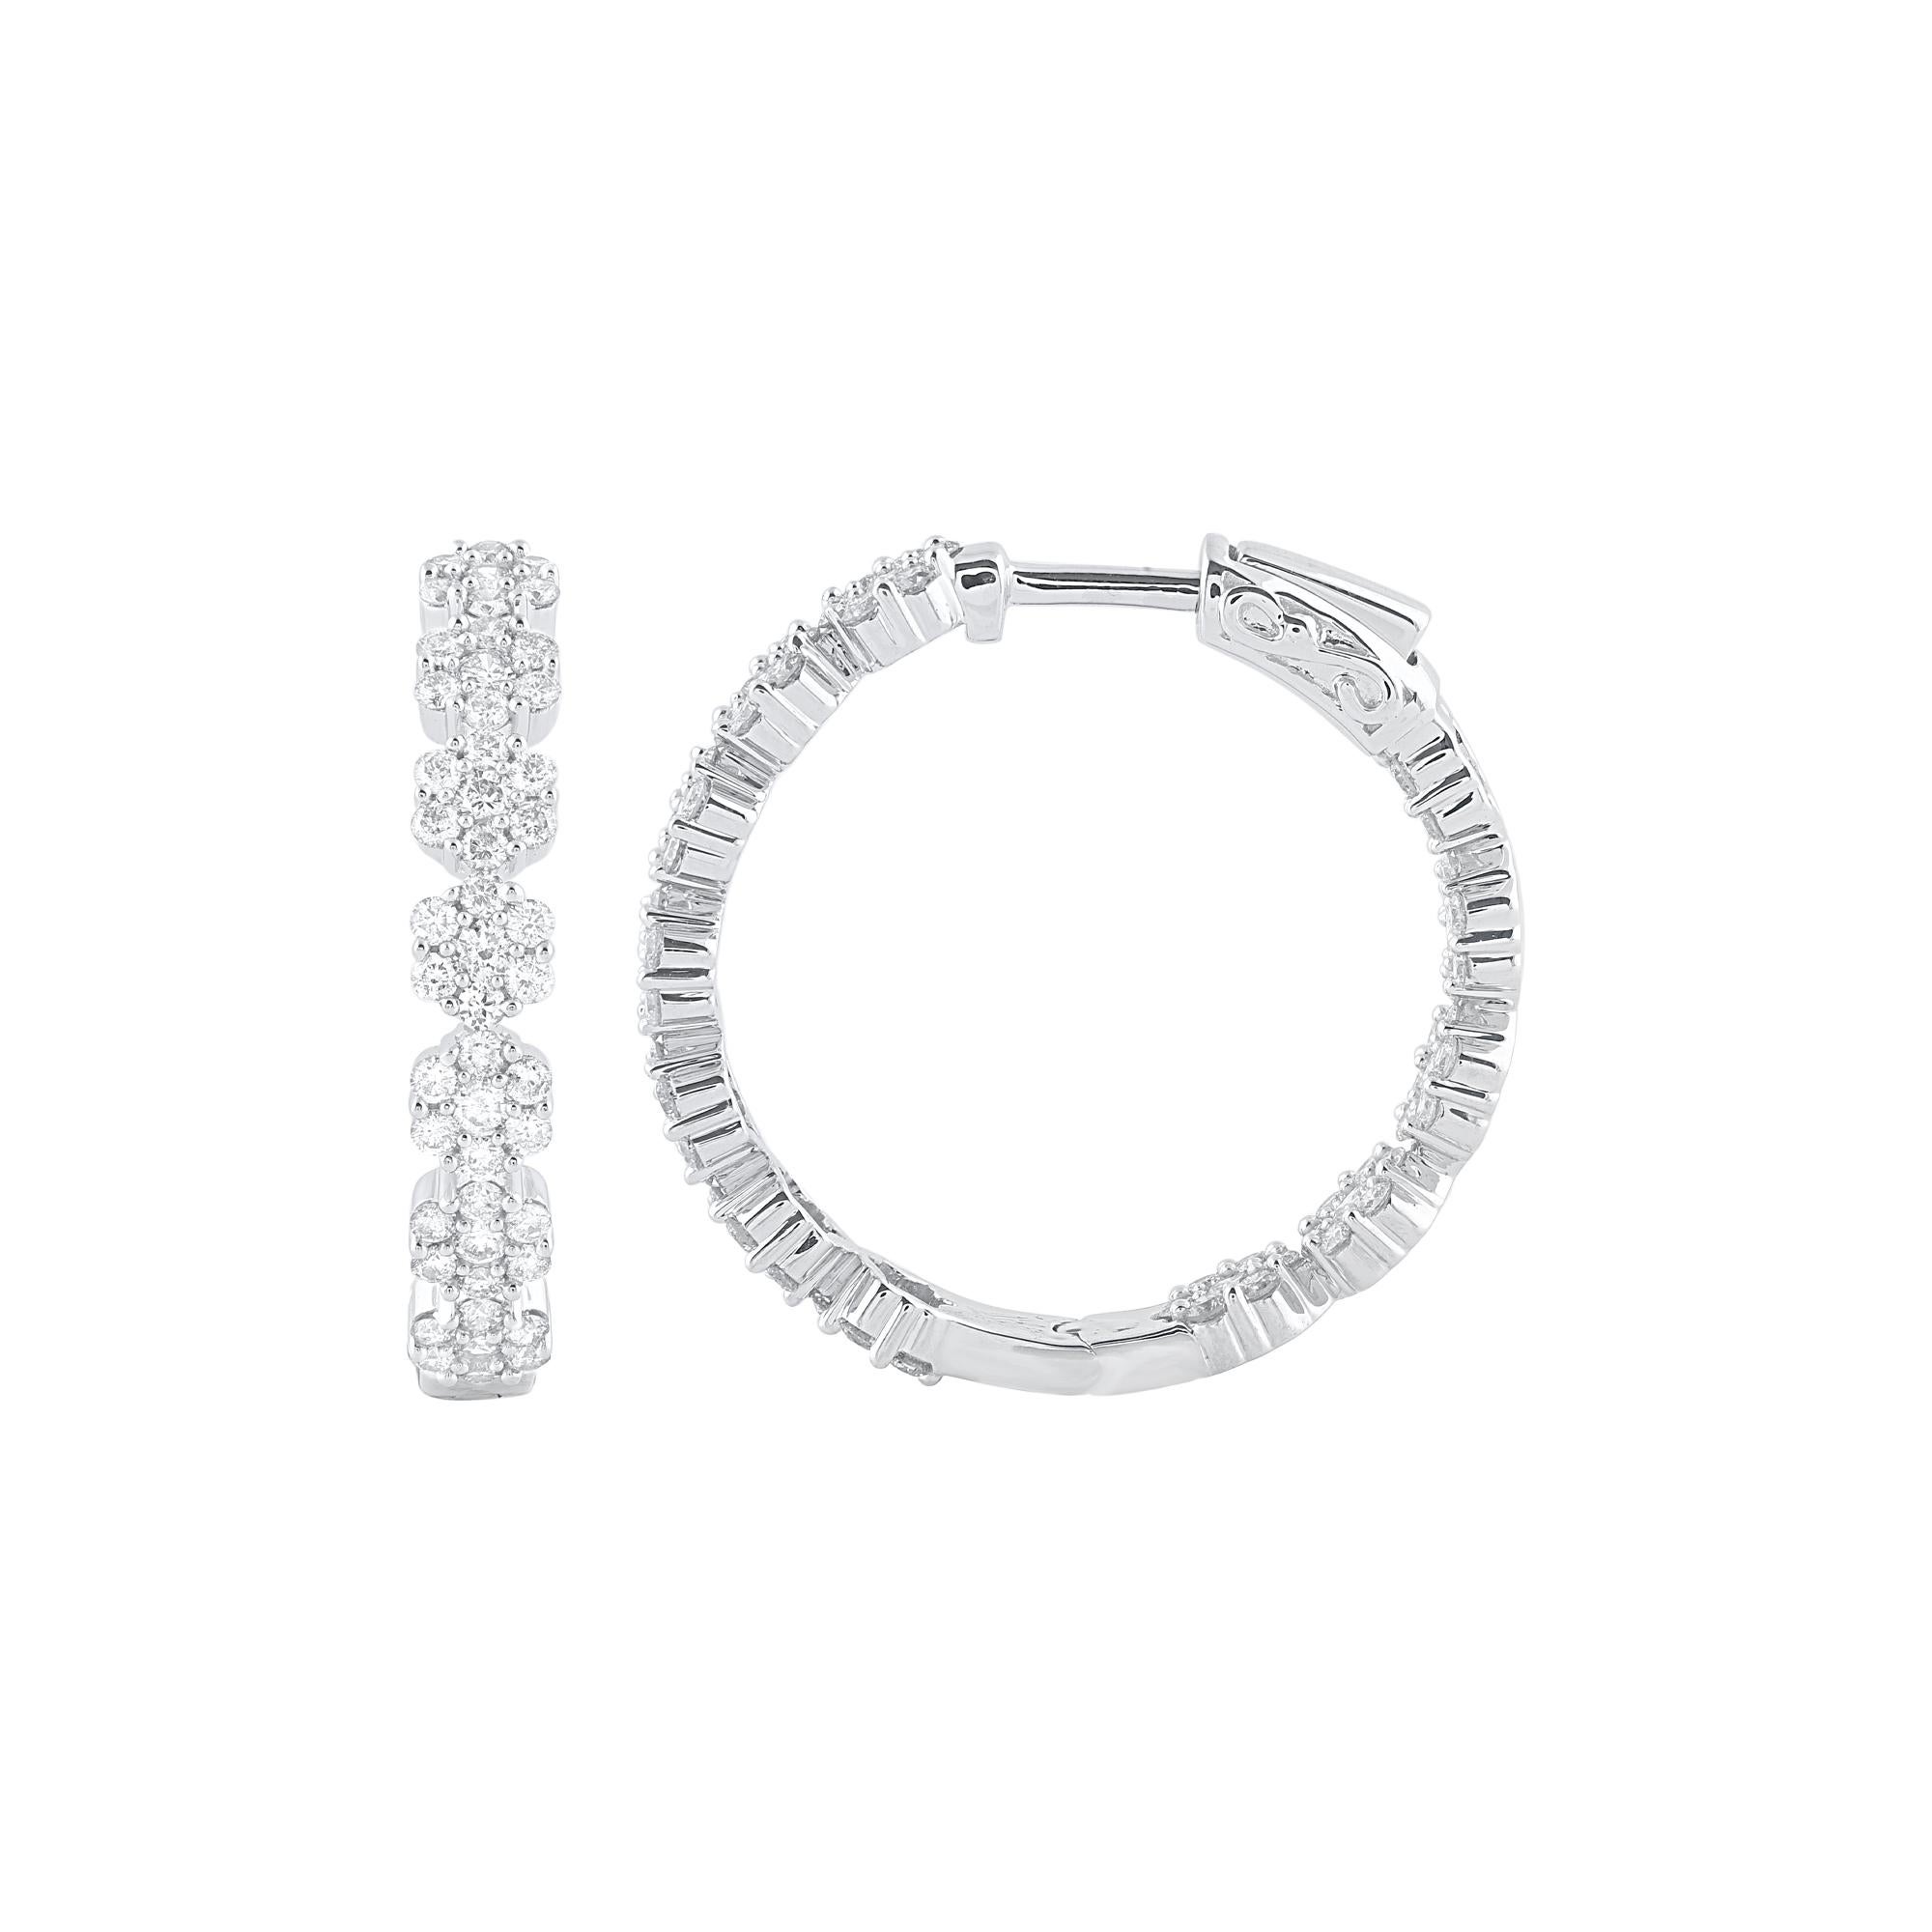 Brighten up your look and your day with these charming diamond hoop earrings. Crafted in 14 Karat white gold with 168 brilliant cut diamond in prong setting. Total diamond weight is 2.50 carat. These earrings secure with hinged back. The white